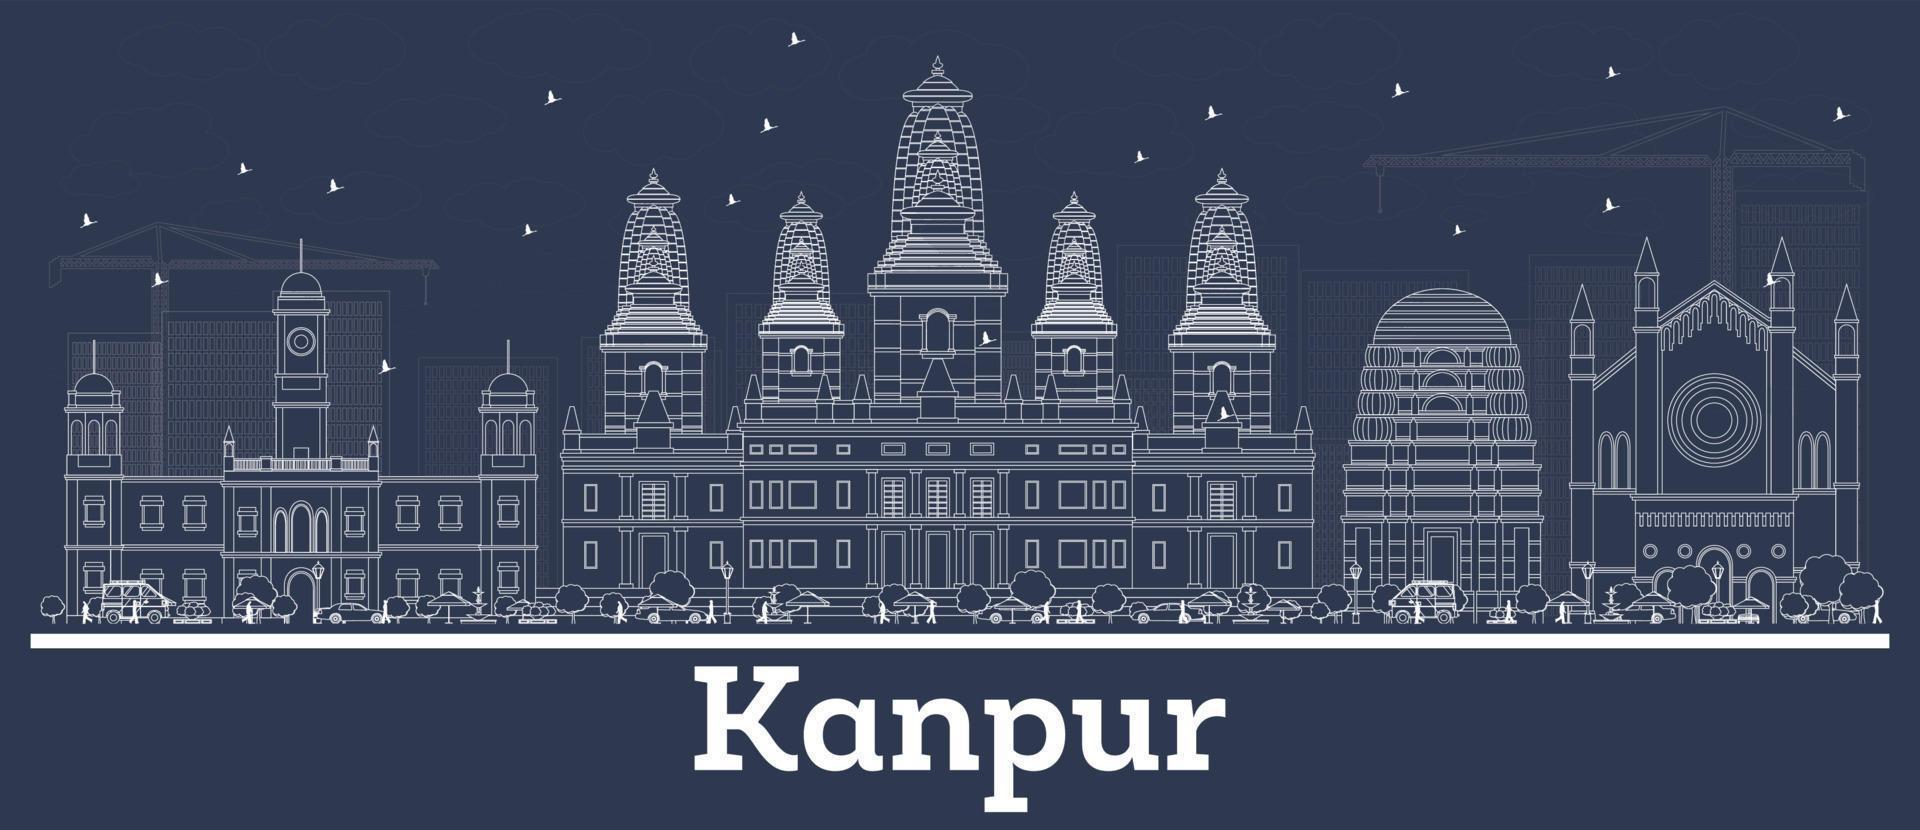 Outline Kanpur India City Skyline with White Buildings. vector